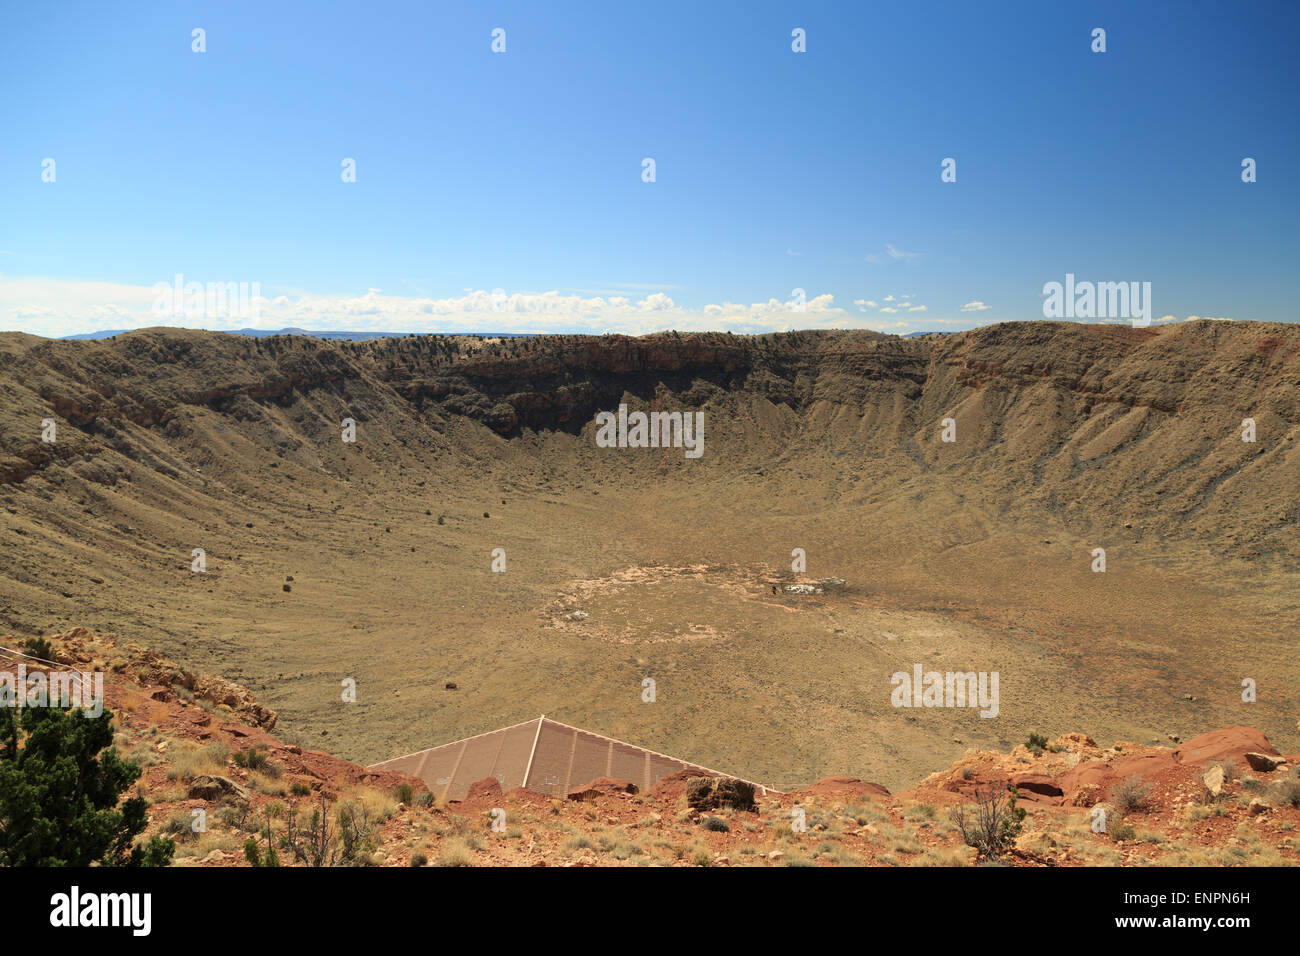 A photograph of the Meteor Crater near Flagstaff in Arizona. It is proclaimed to be "best preserved meteorite crater on Earth''. Stock Photo